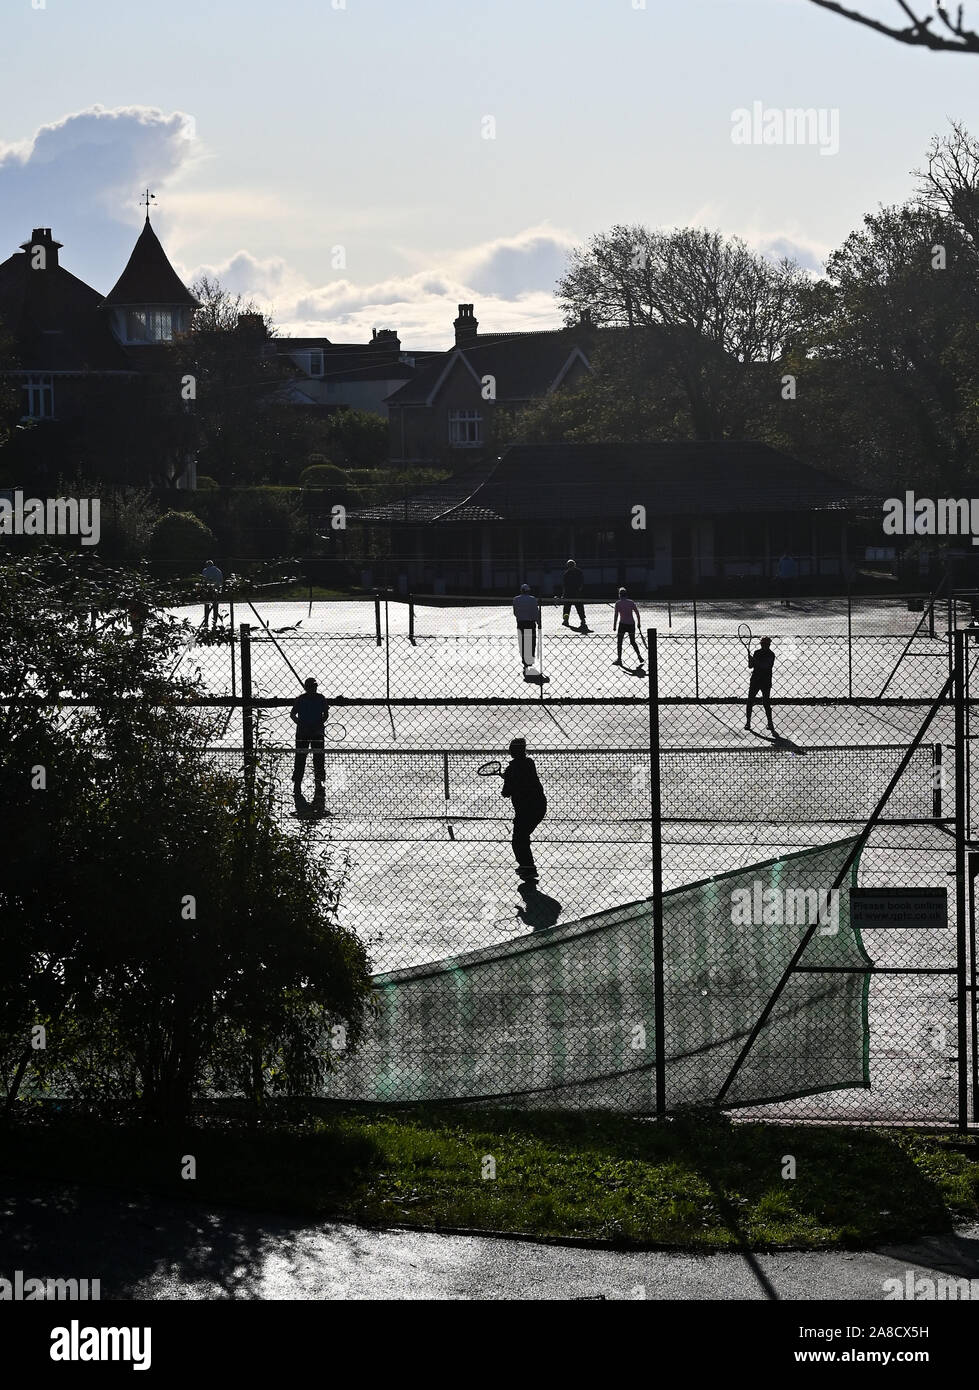 Brighton UK 8th November 2019 - Tennis players make the most of a beautiful sunny Autumn morning in Queens Park Brighton as other parts of Britain experience heavy rain and floods particularly in the north. Credit: Simon Dack / Alamy Live News Stock Photo